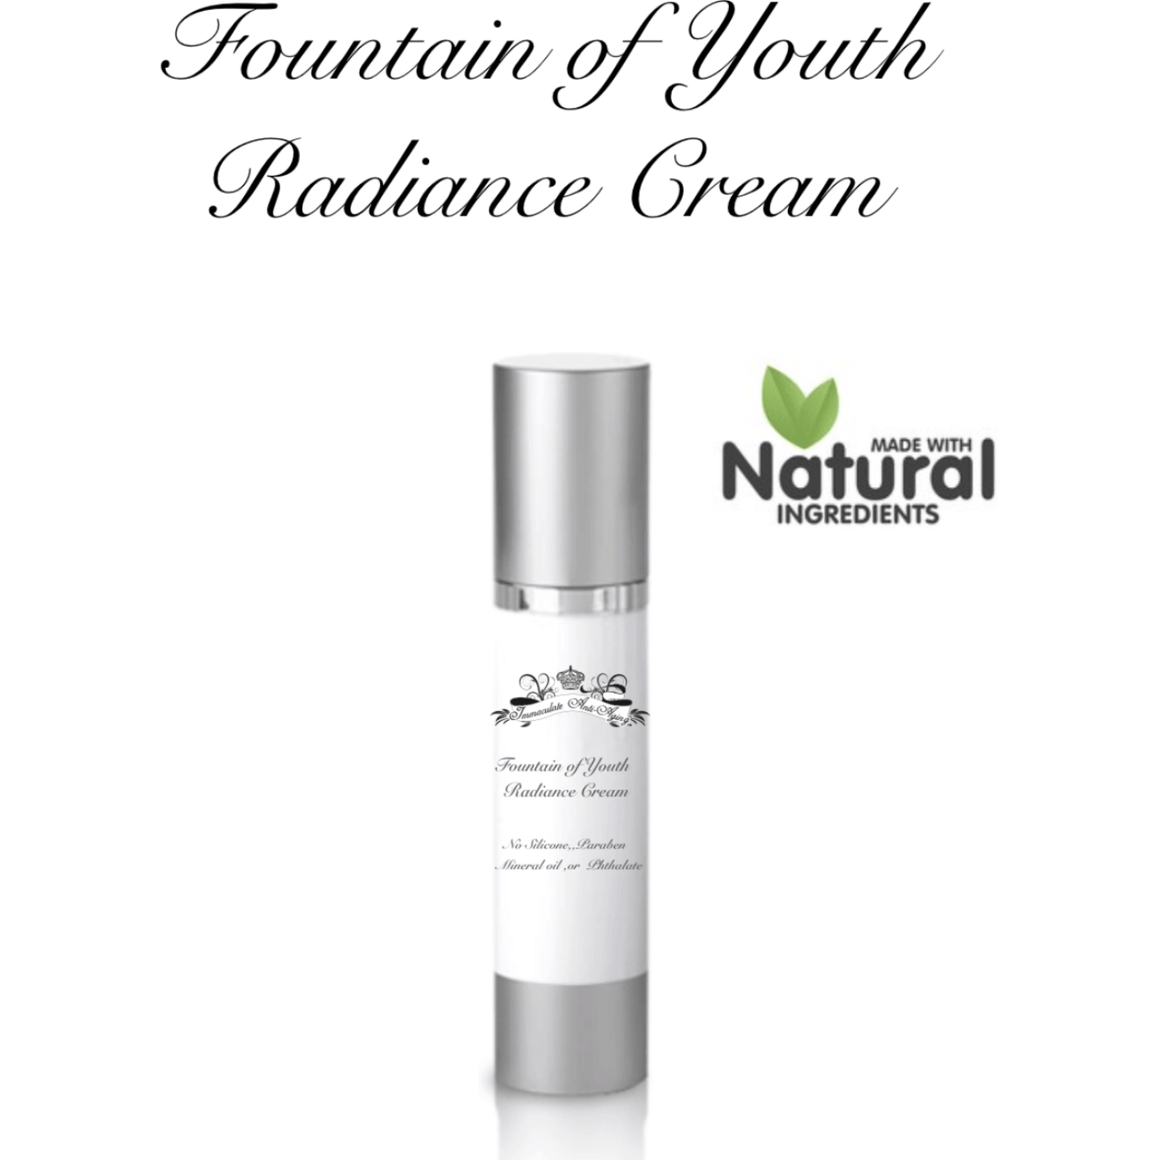 Fountain of Youth Radiance Cream - Immaculate Anti-Aging®